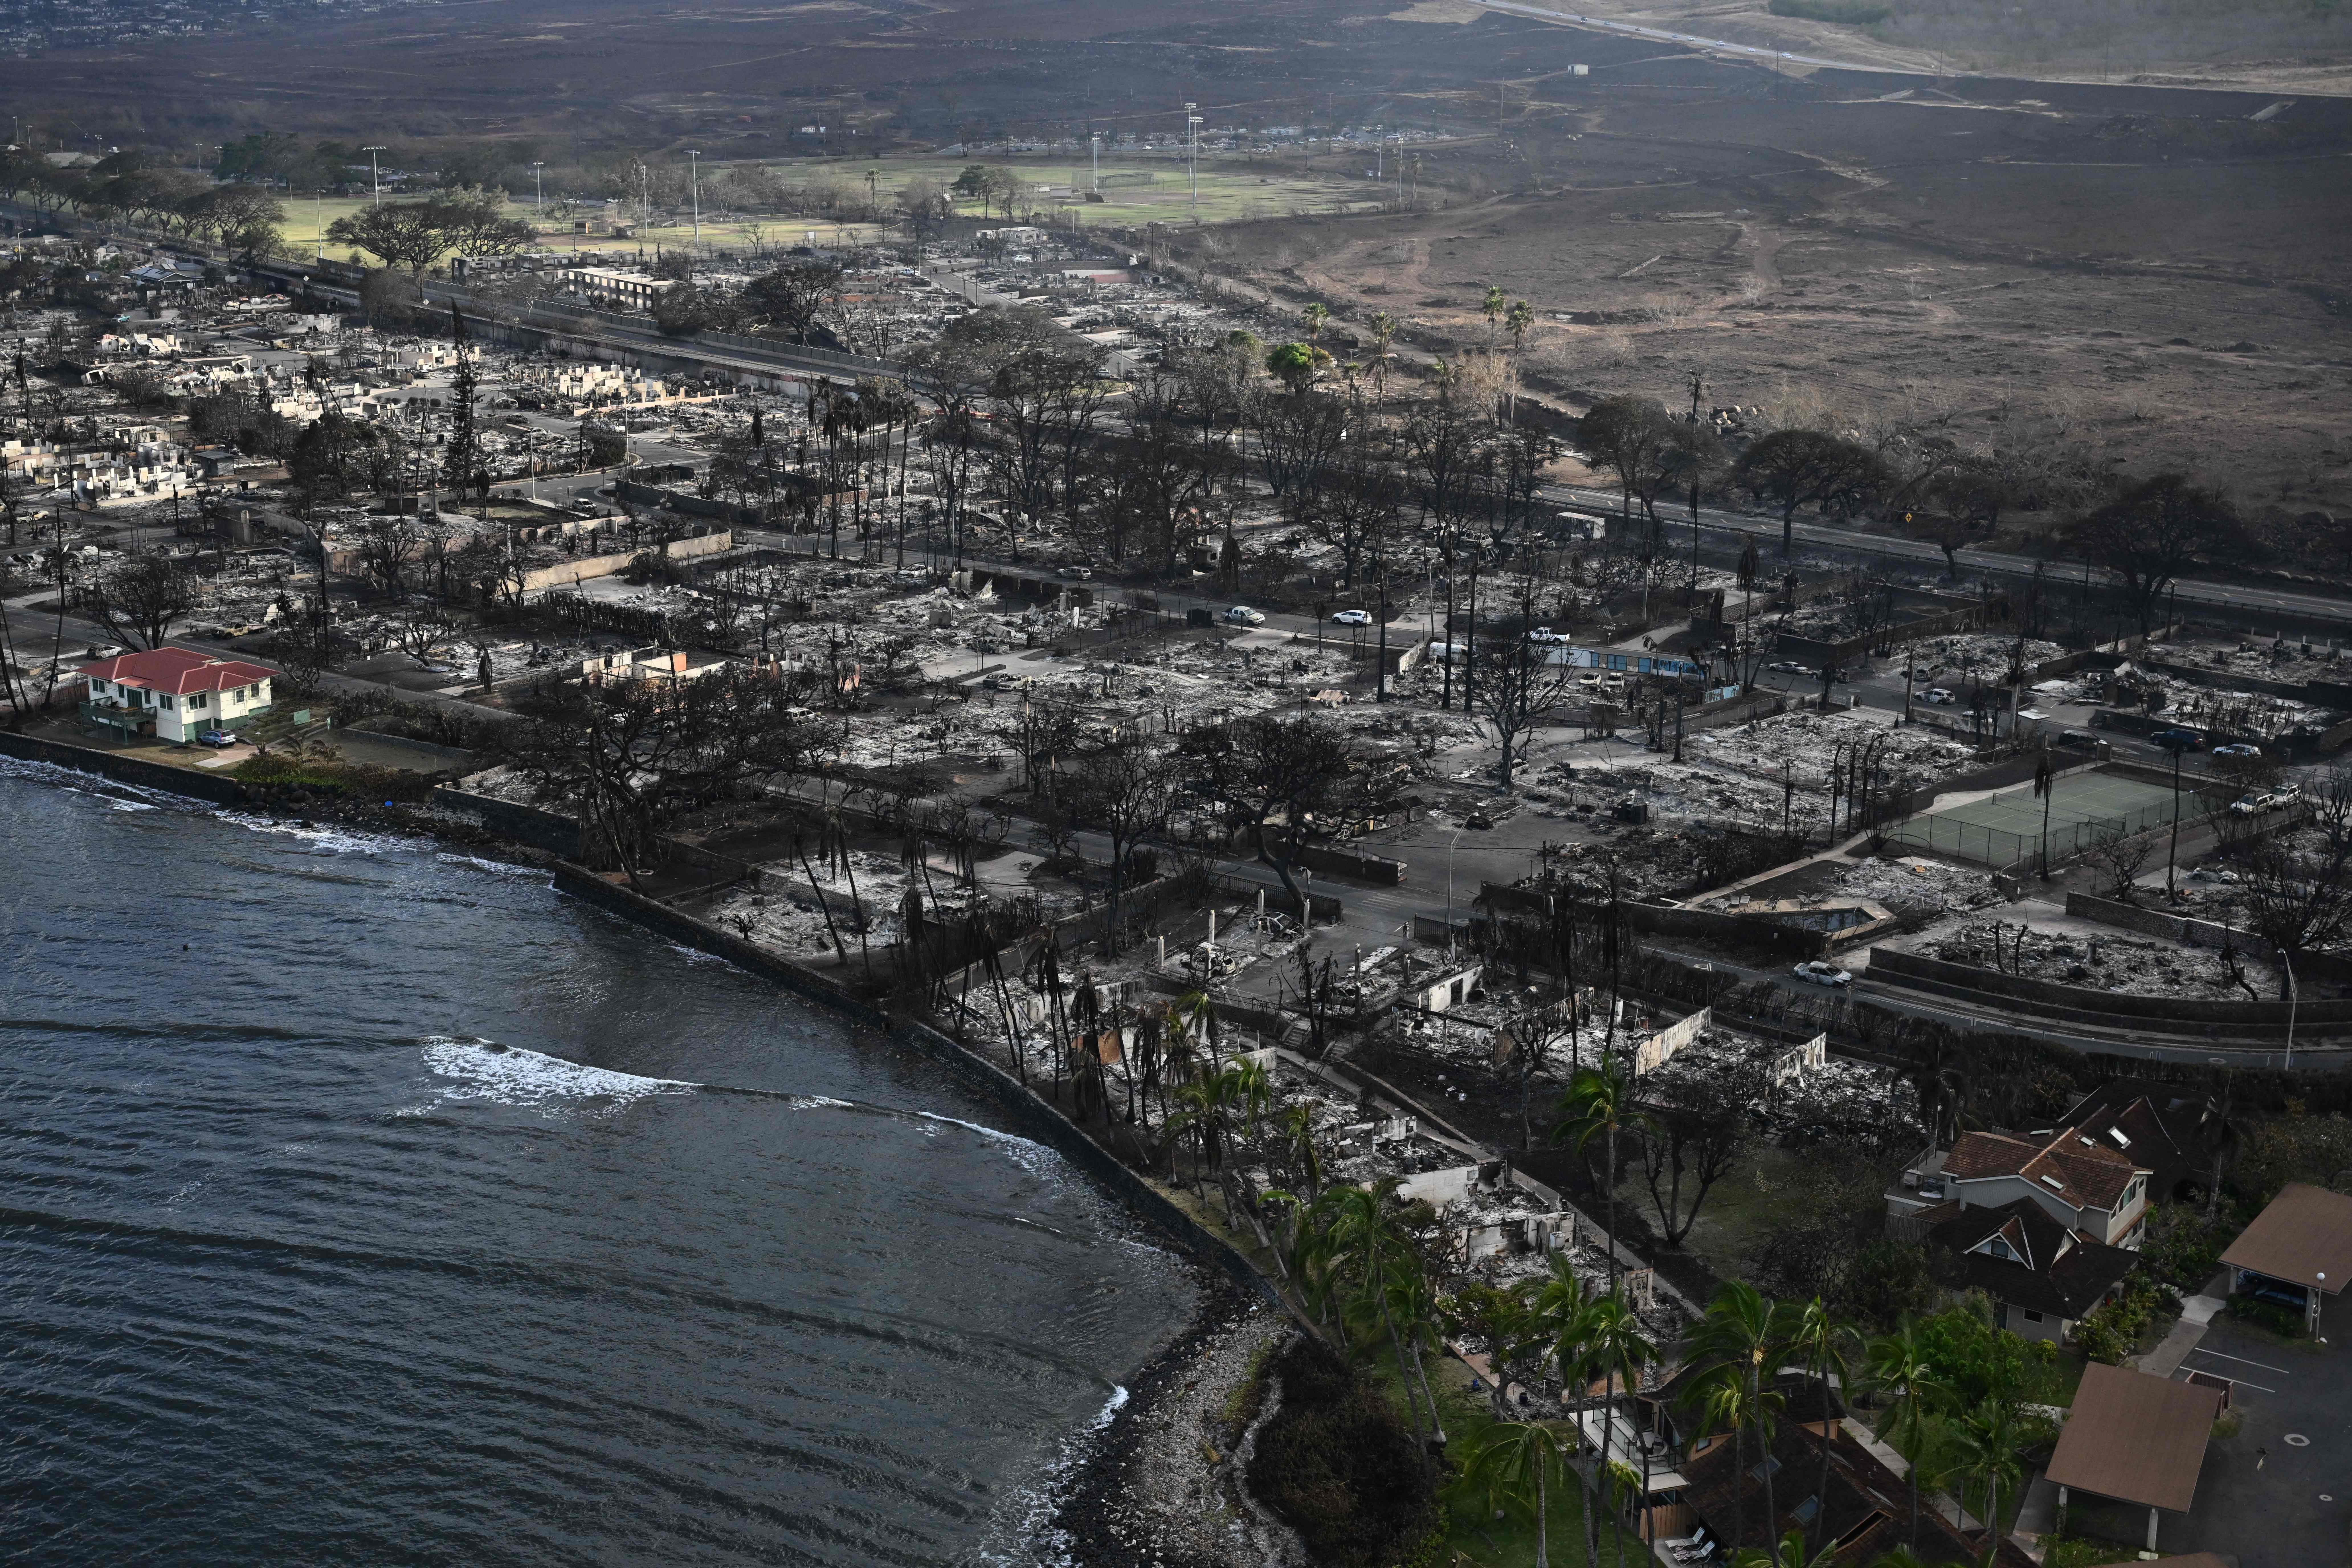 An aerial view of Lahaina after wildfires burned through the town on the Hawaiian island of Maui, on August 10, 2023. At least 36 people have died after a fast-moving wildfire turned Lahaina to ashes, officials said August 9, as visitors asked to leave the island of Maui found themselves stranded at the airport. The fires began burning early August 8, scorching thousands of acres and putting homes, businesses and 35,000 lives at risk on Maui, the Hawaii Emergency Management Agency said in a statement. (Photo by Patrick T. Fallon / AFP) (Photo by PATRICK T. FALLON/AFP via Getty Images)